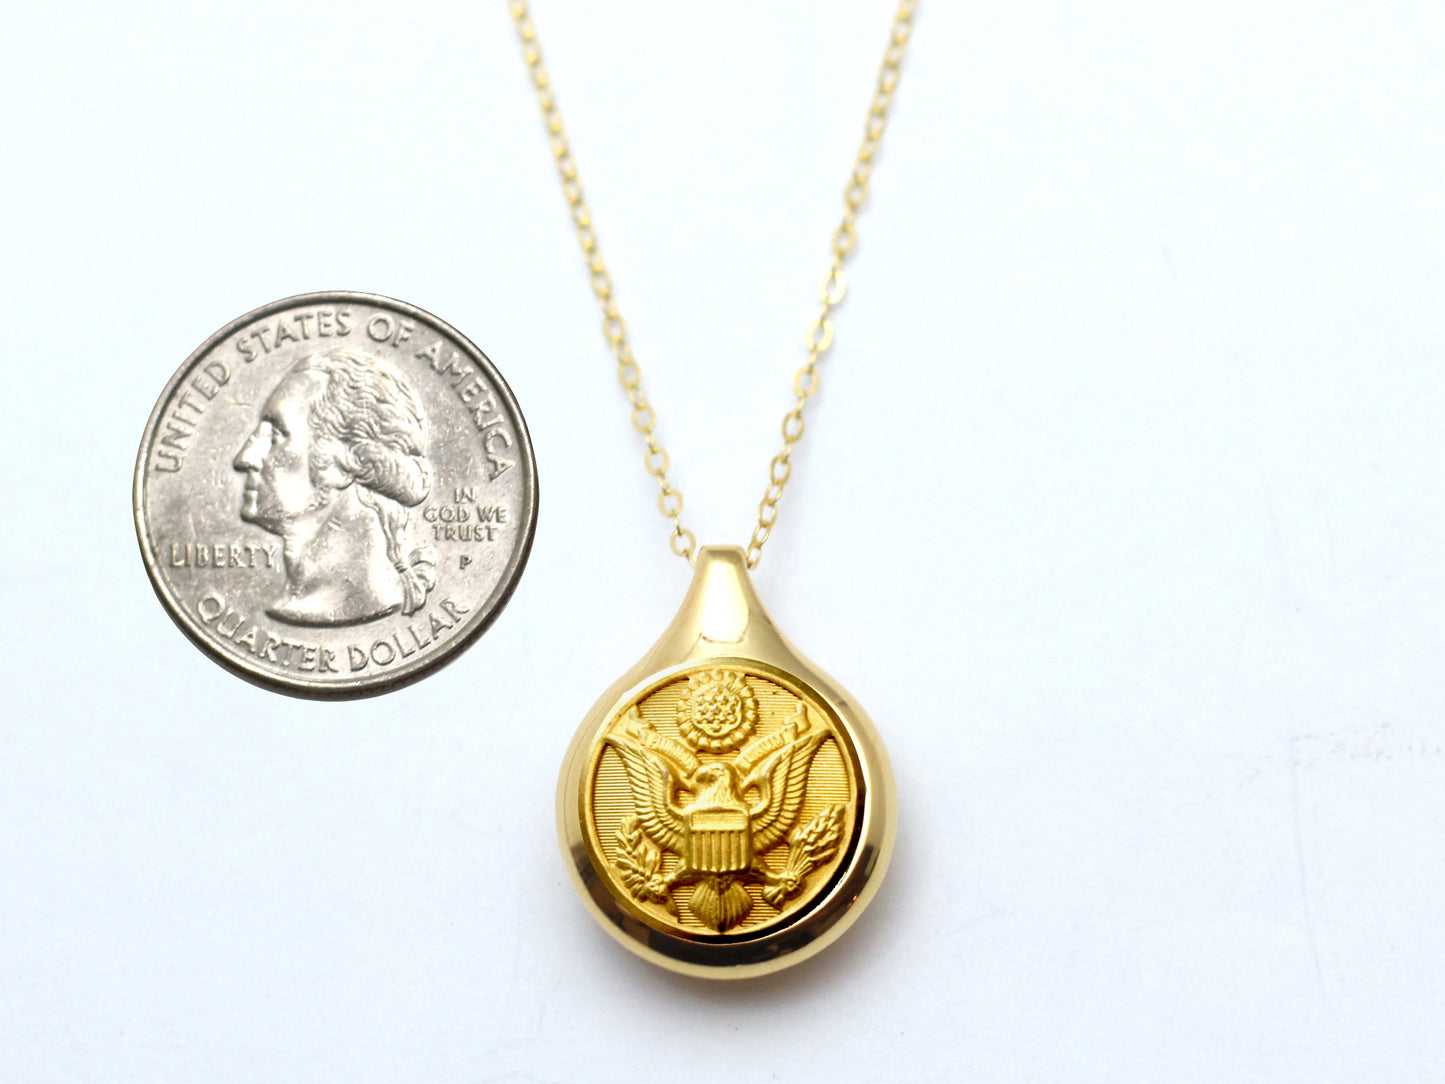 Army Button Sleek Gold Necklace